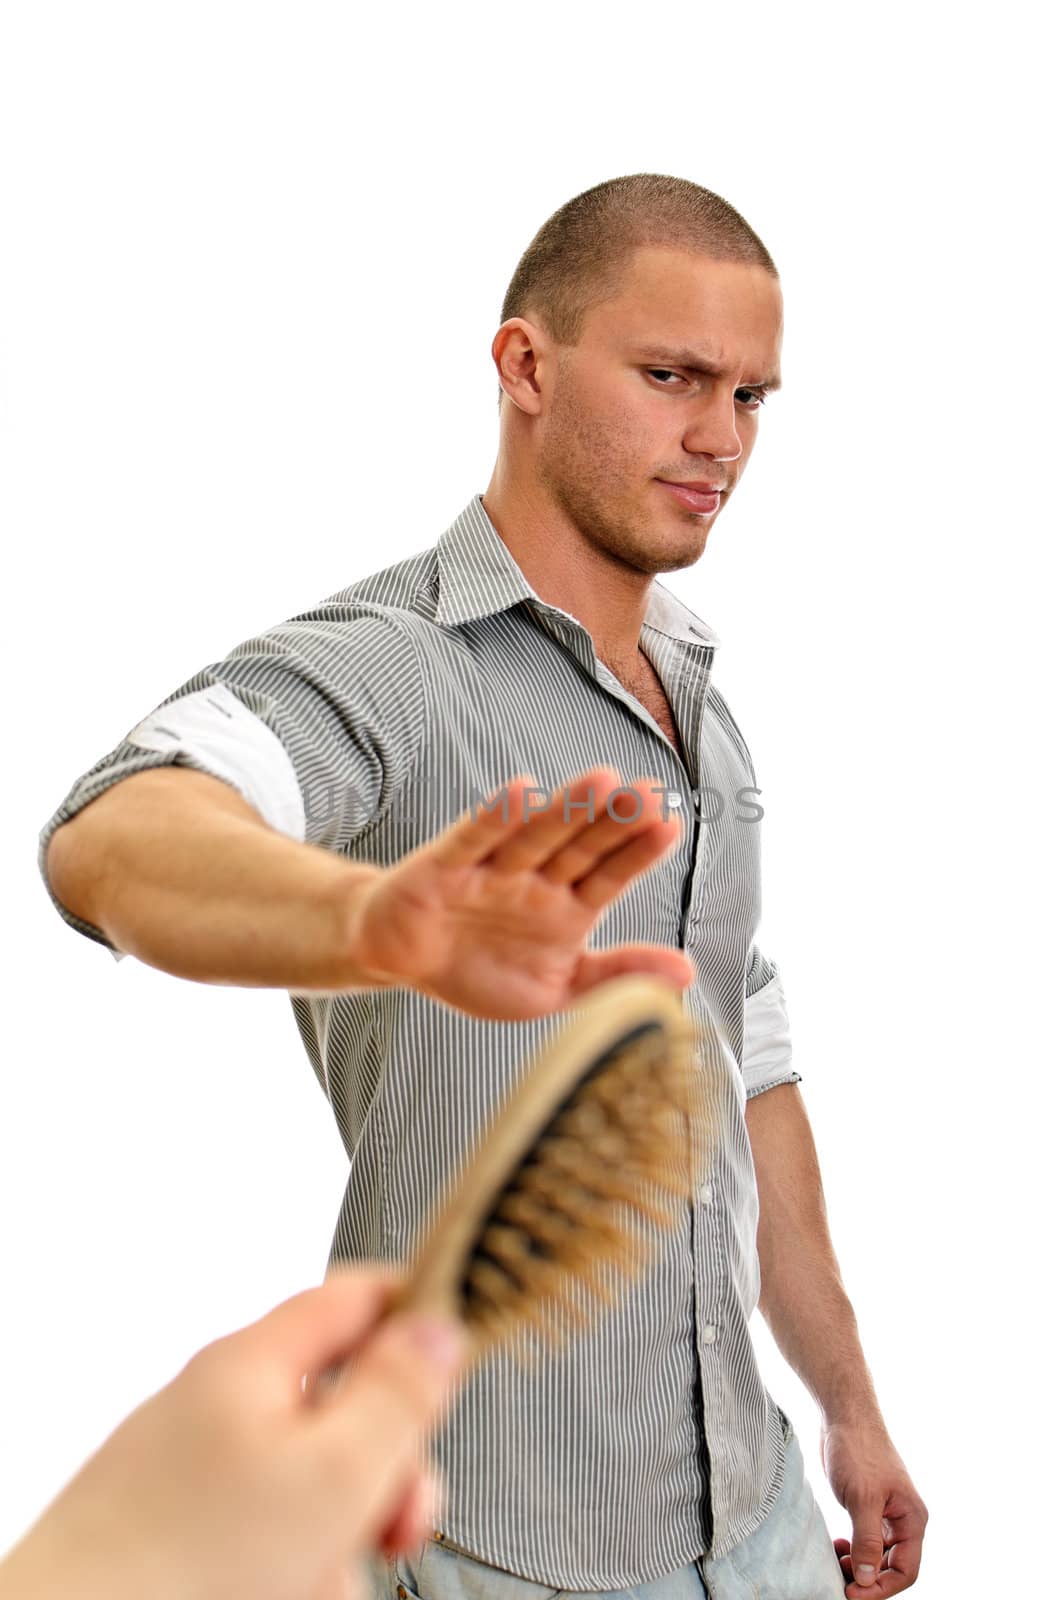 Hand offers hair brush to man with short hairstyle. Isolated on white.